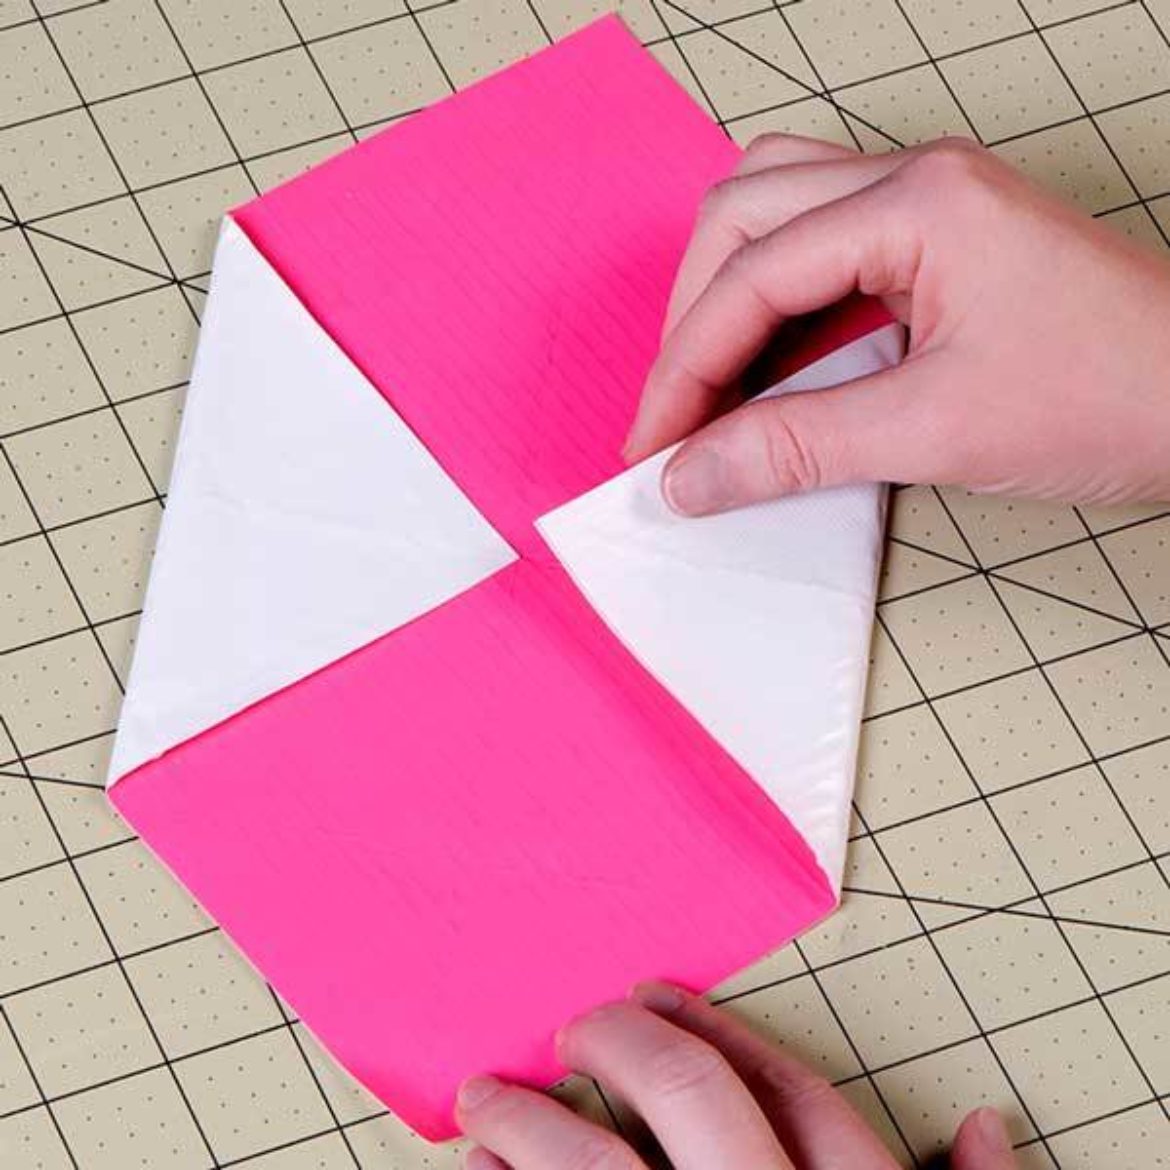 Four corners of the square folded to the center to form a smaller square shape